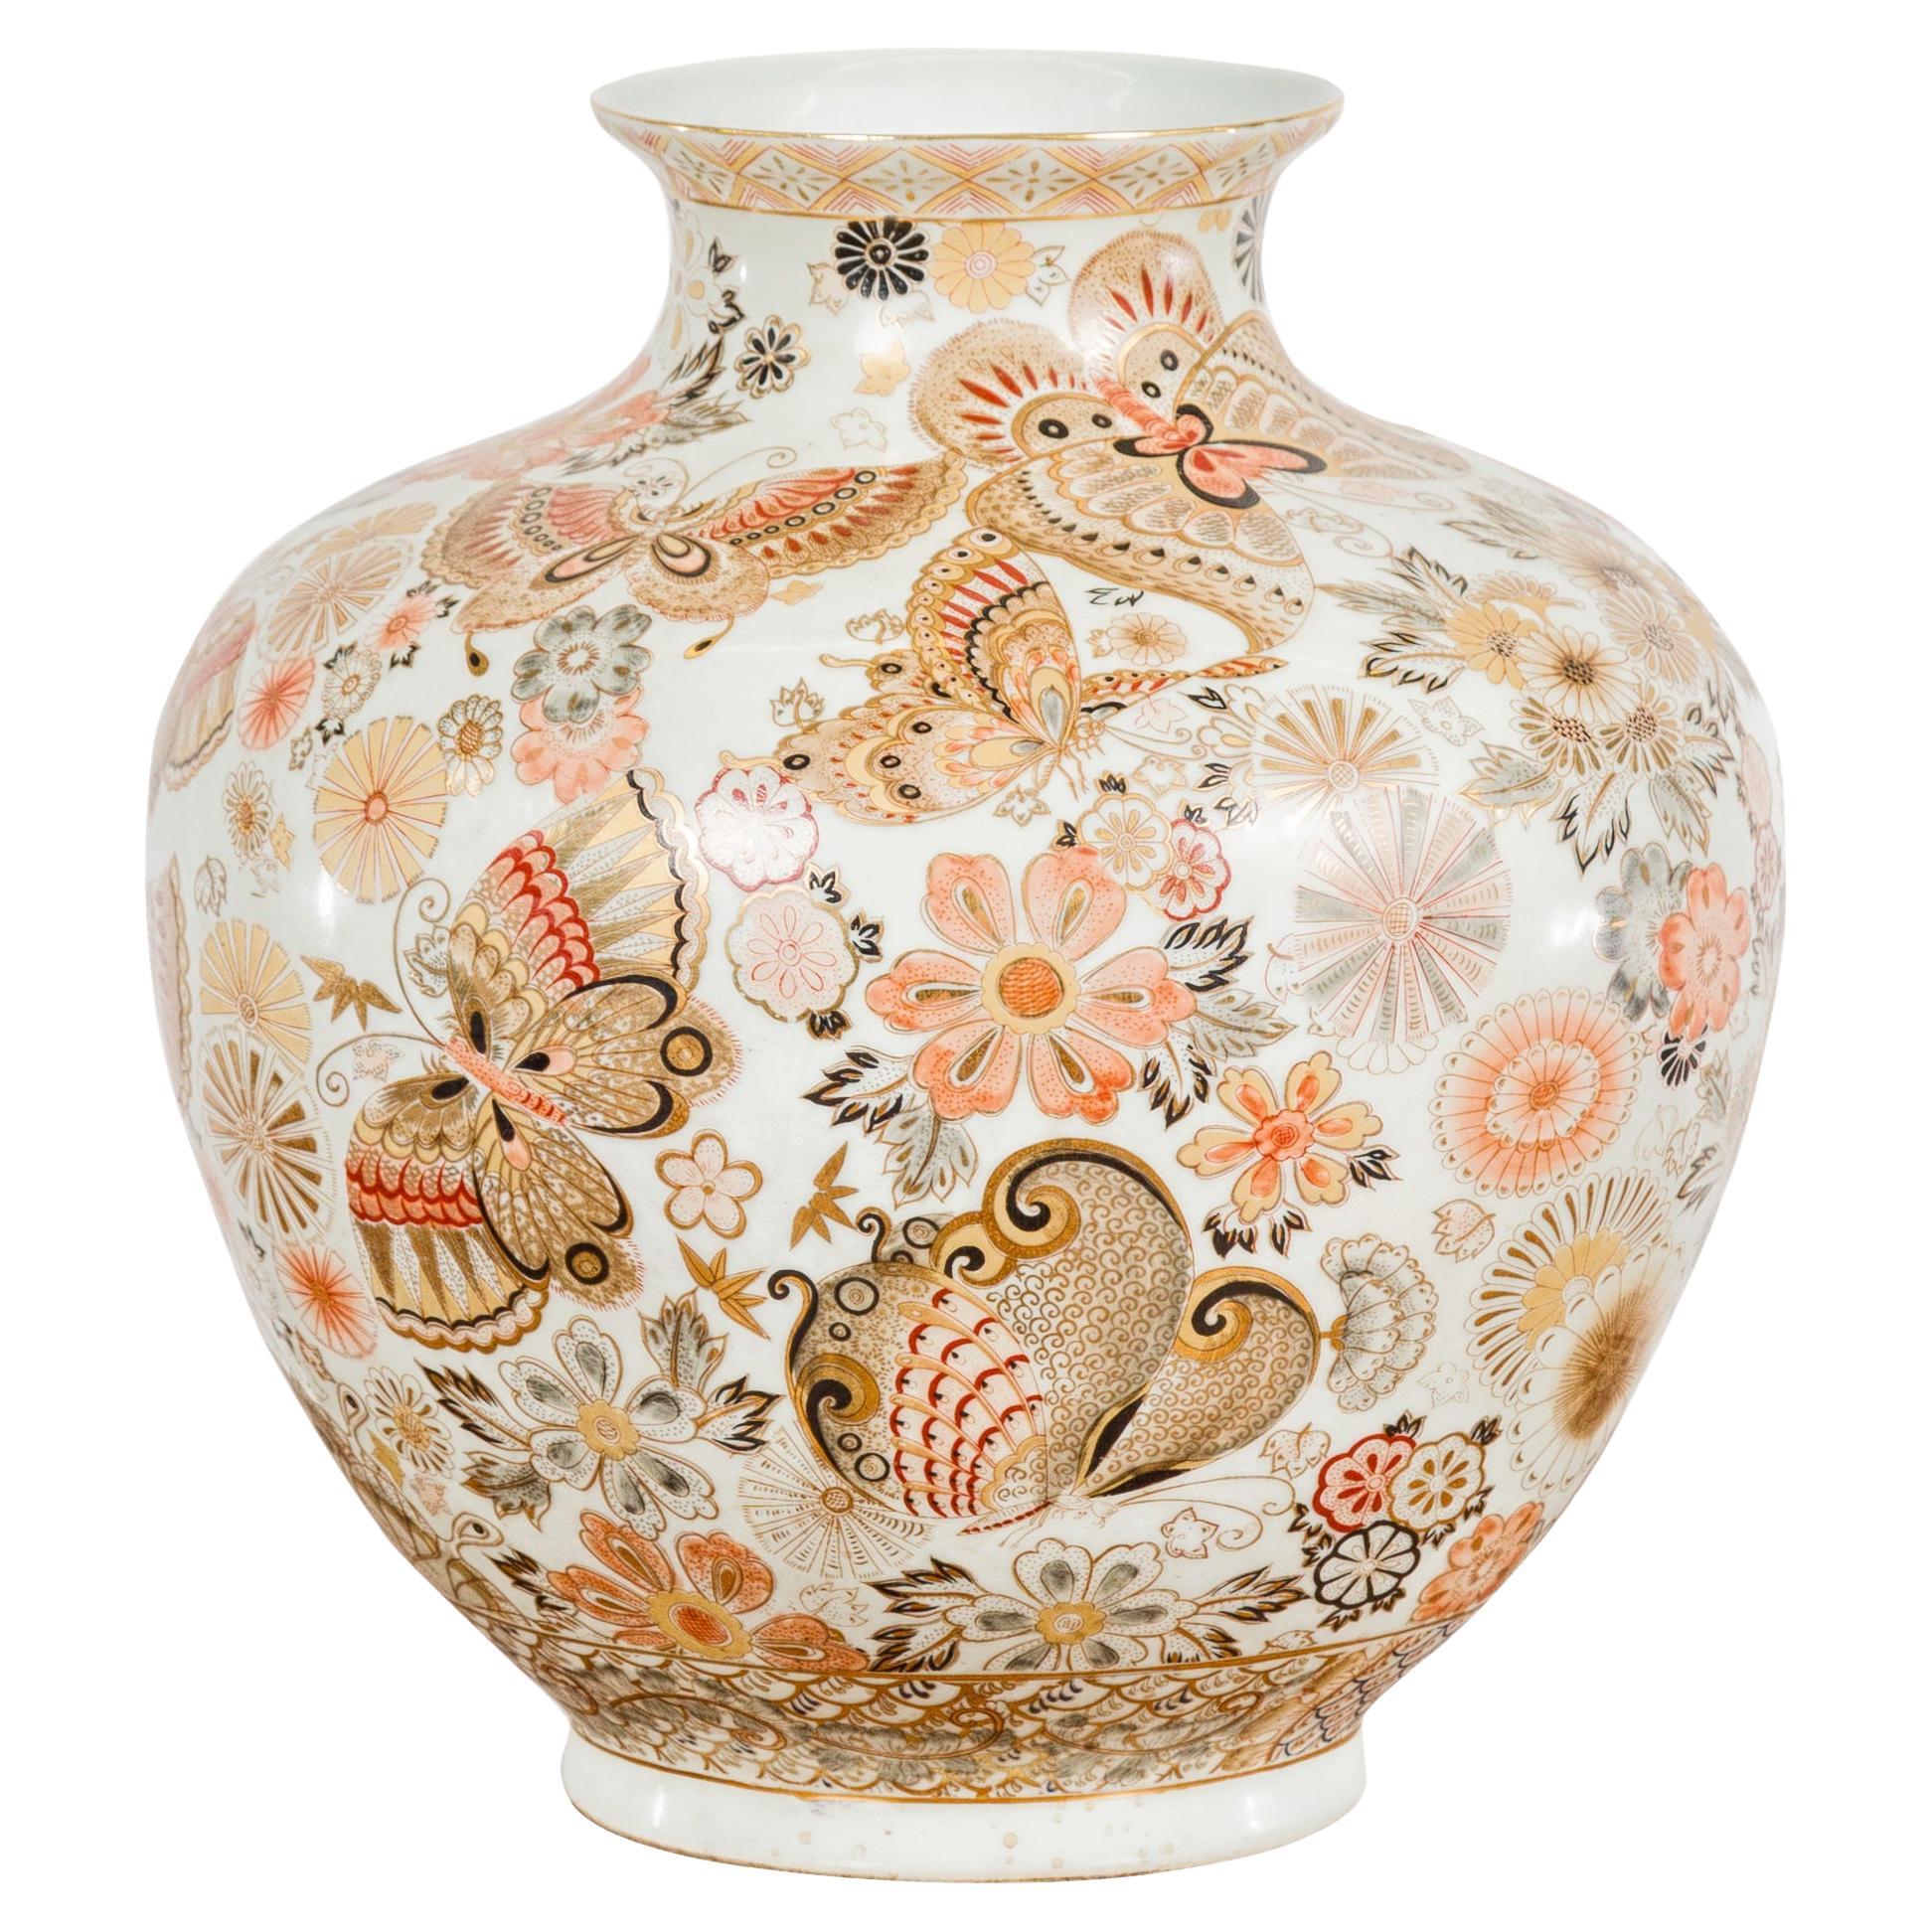 Vintage Japanese Kutani Style Vase with Flowers and Butterflies